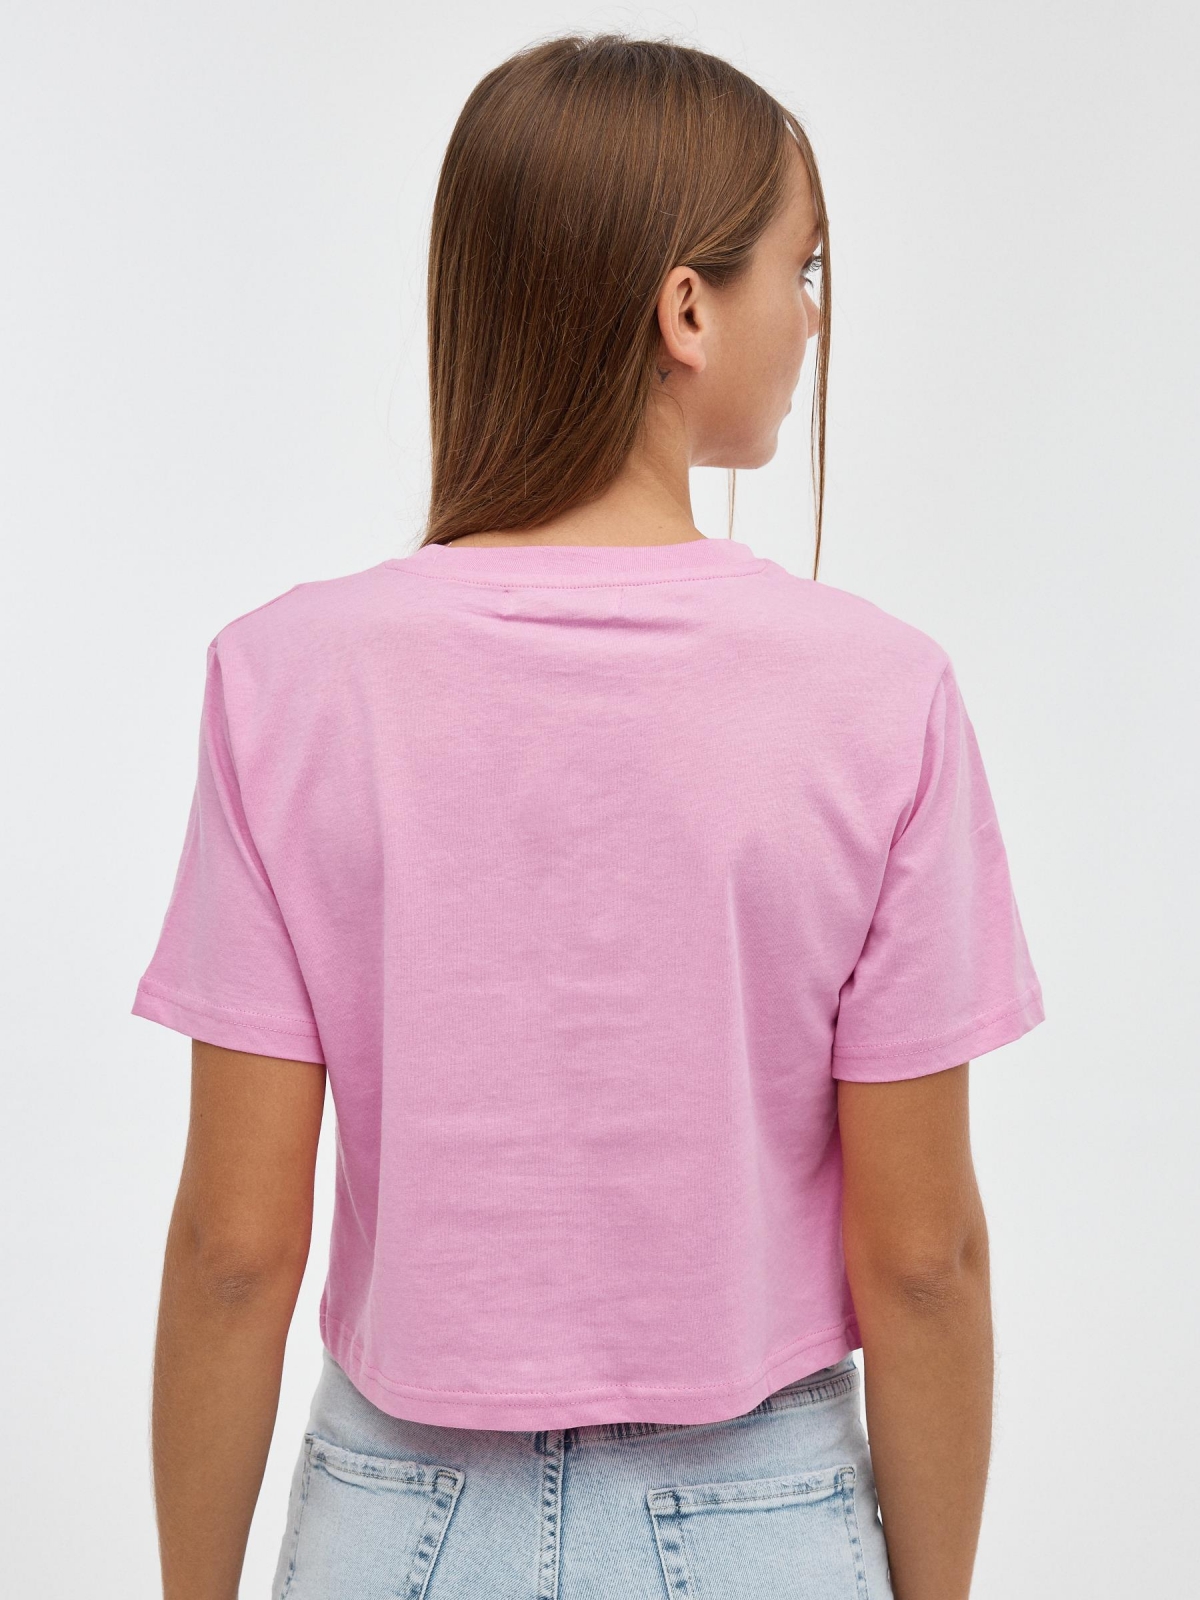 Pink graphic crop top bubblegum pink middle back view